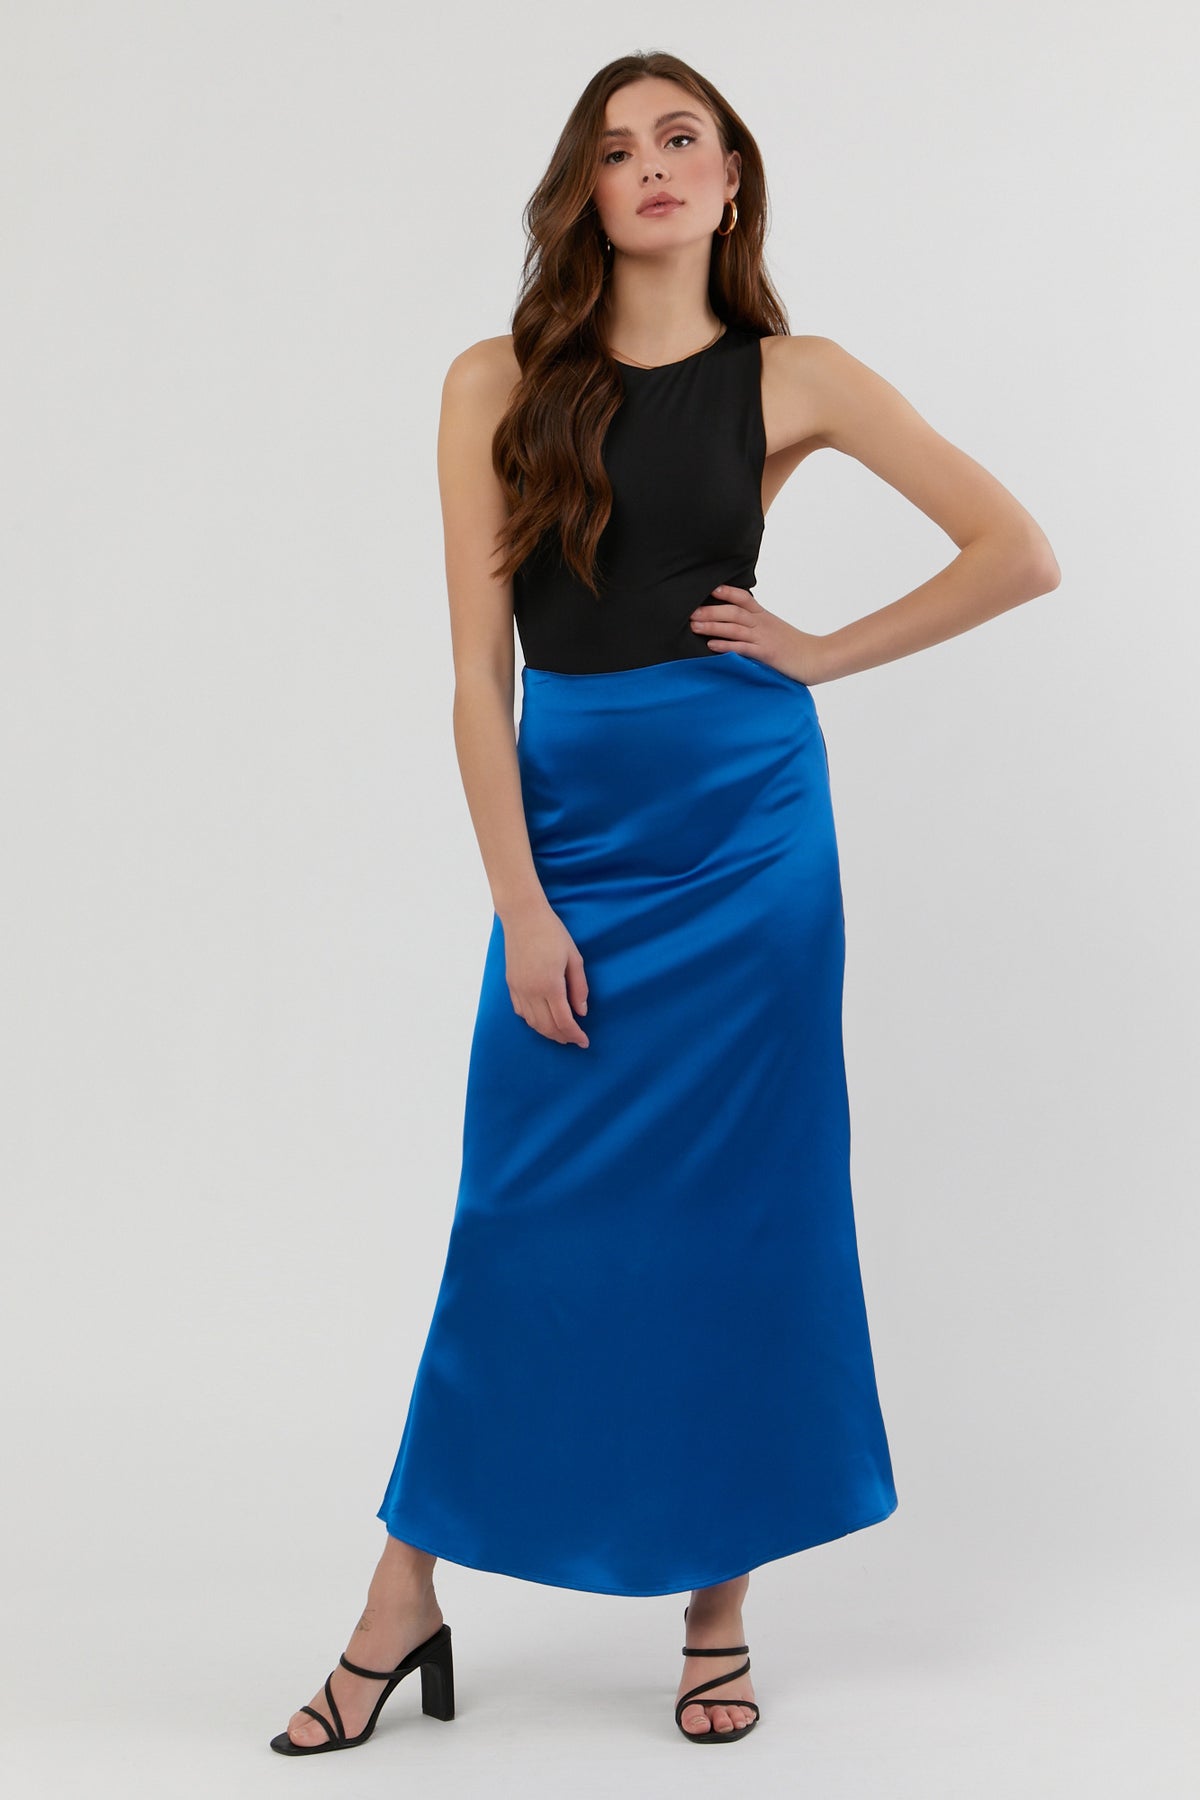 Latest designs, Satin Flare Maxi Skirt Sirens . Shop now and get